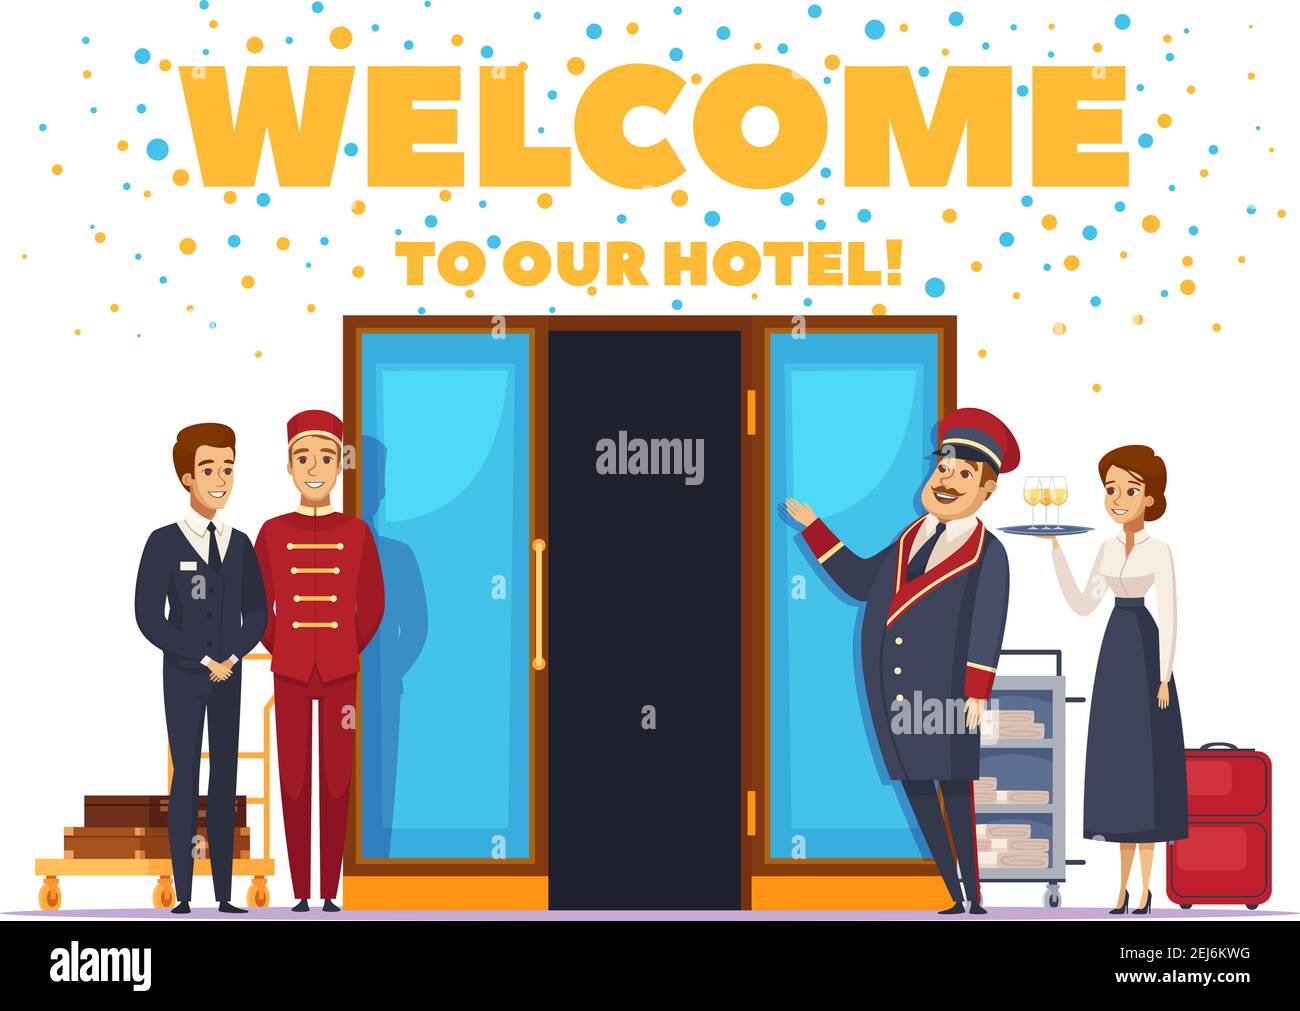 Welcome to hotel cartoon poster with hospitable hotel staff near open doors vector illustration Stock Vector